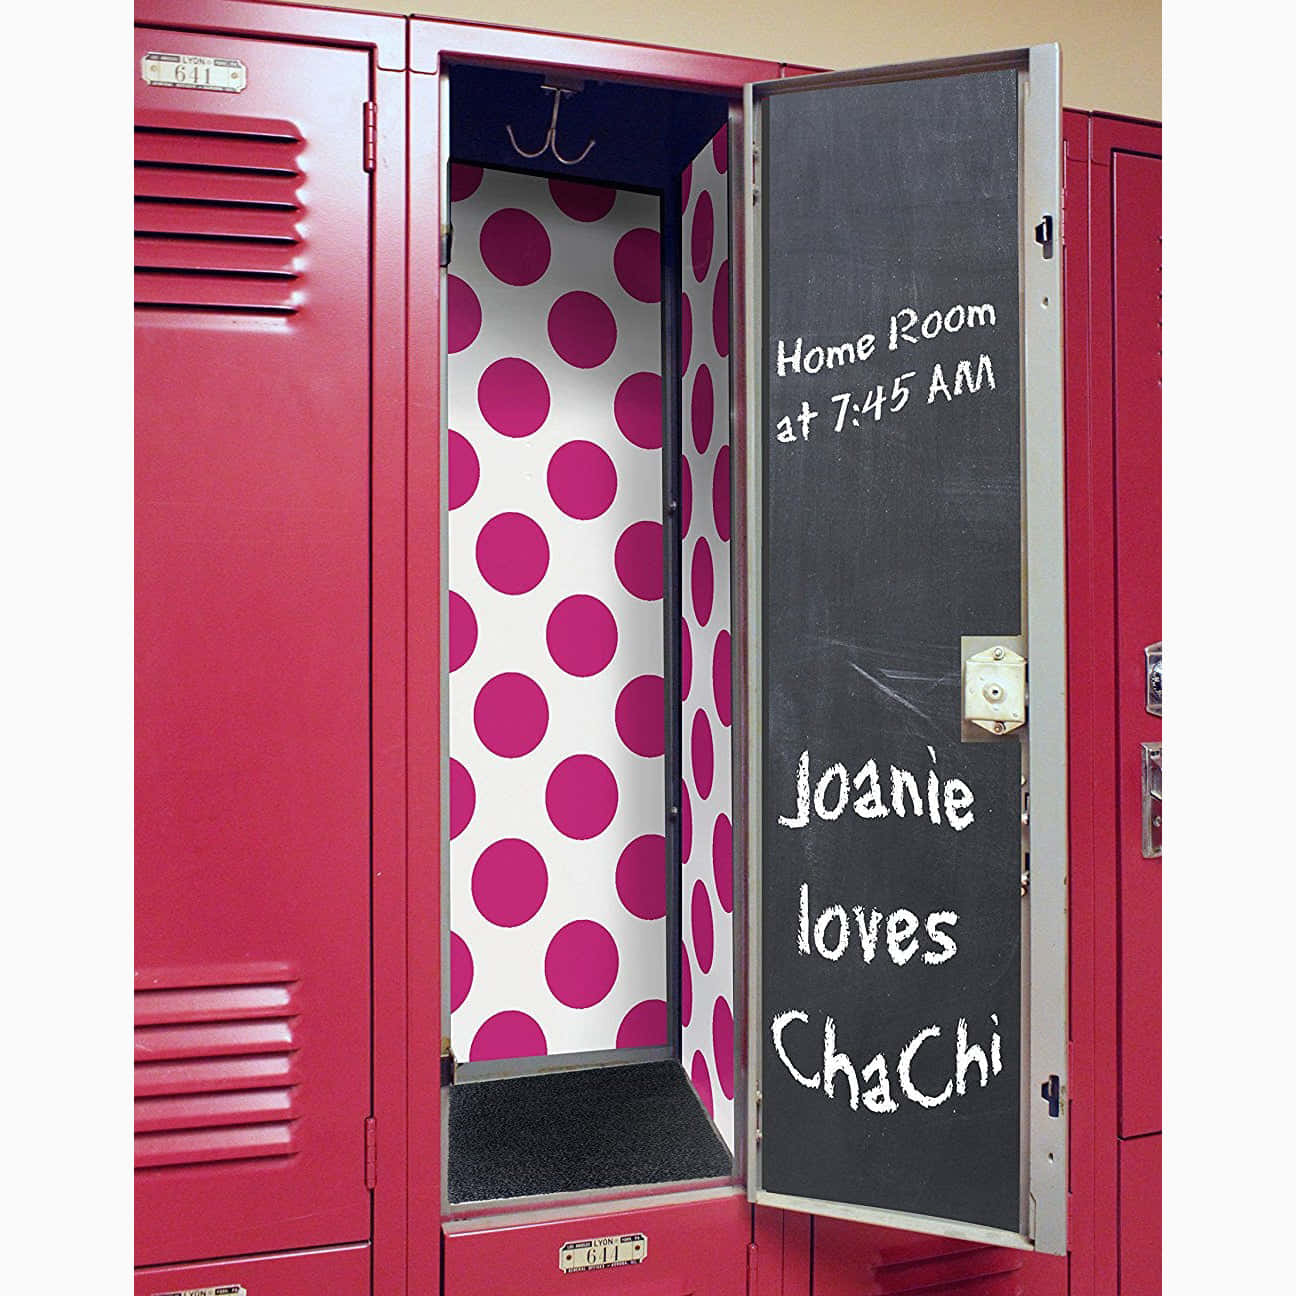 Safely store your valuables in a locker